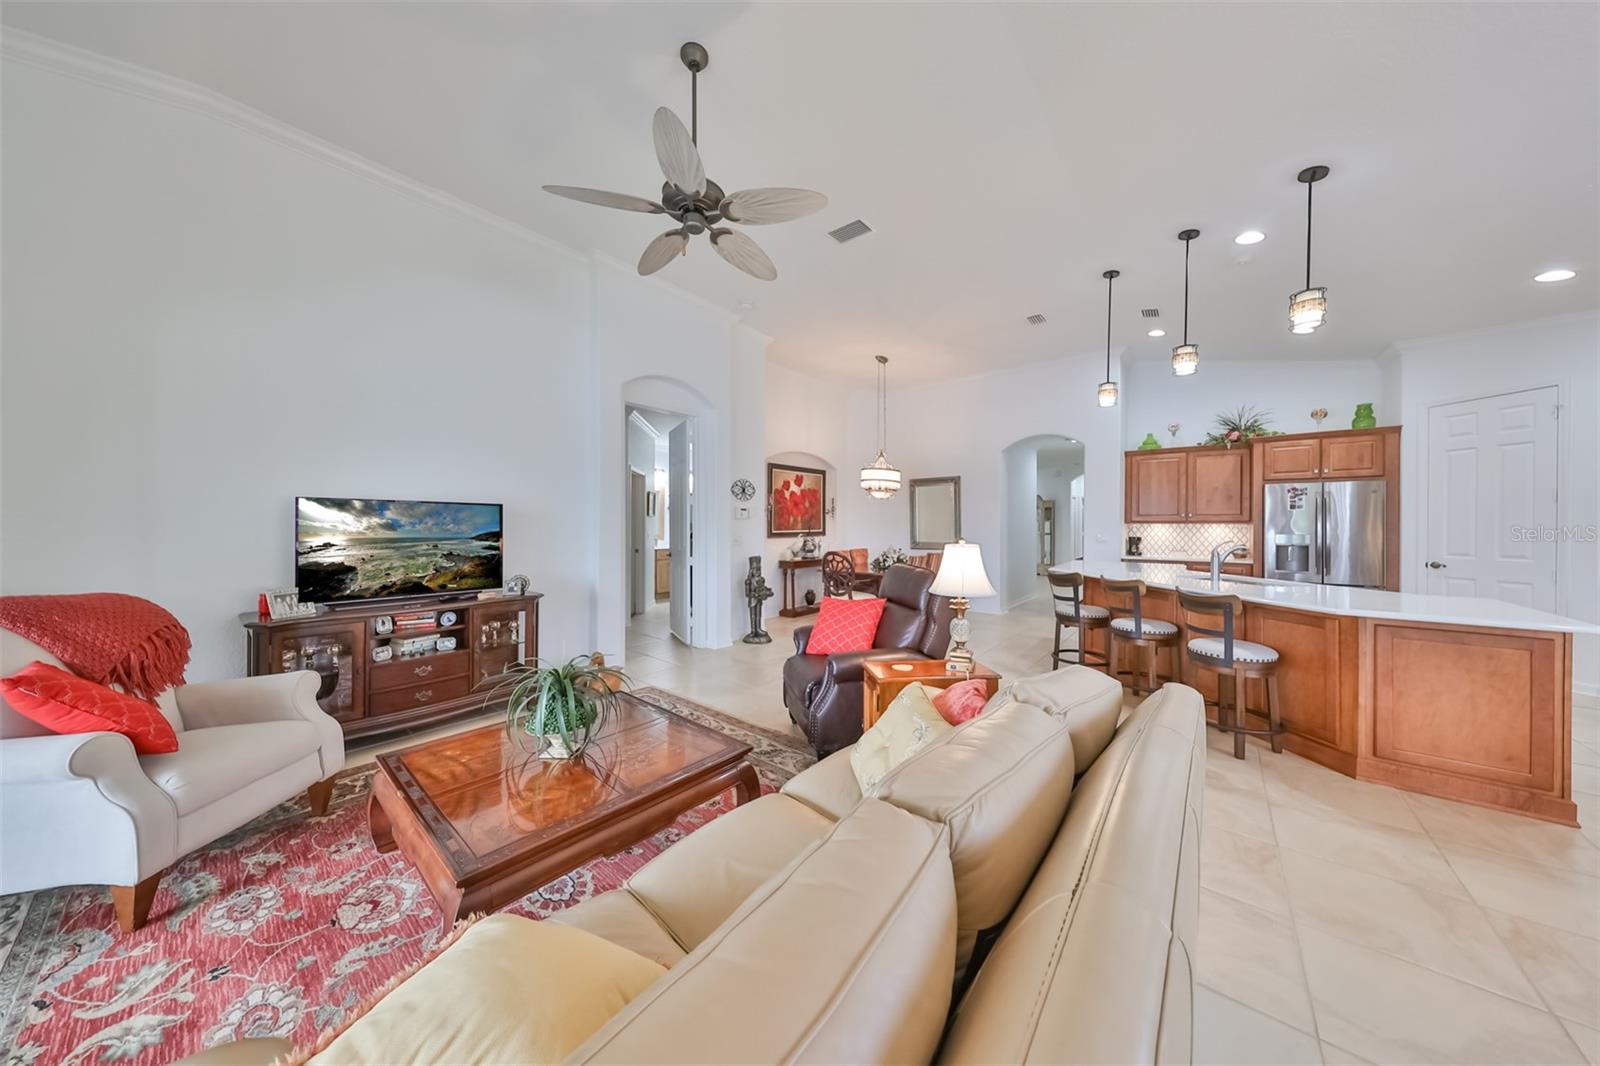 Relaxed Florida living and easy entertaining whether it is family or friends.  Remember this is a TURN-KEY condo.